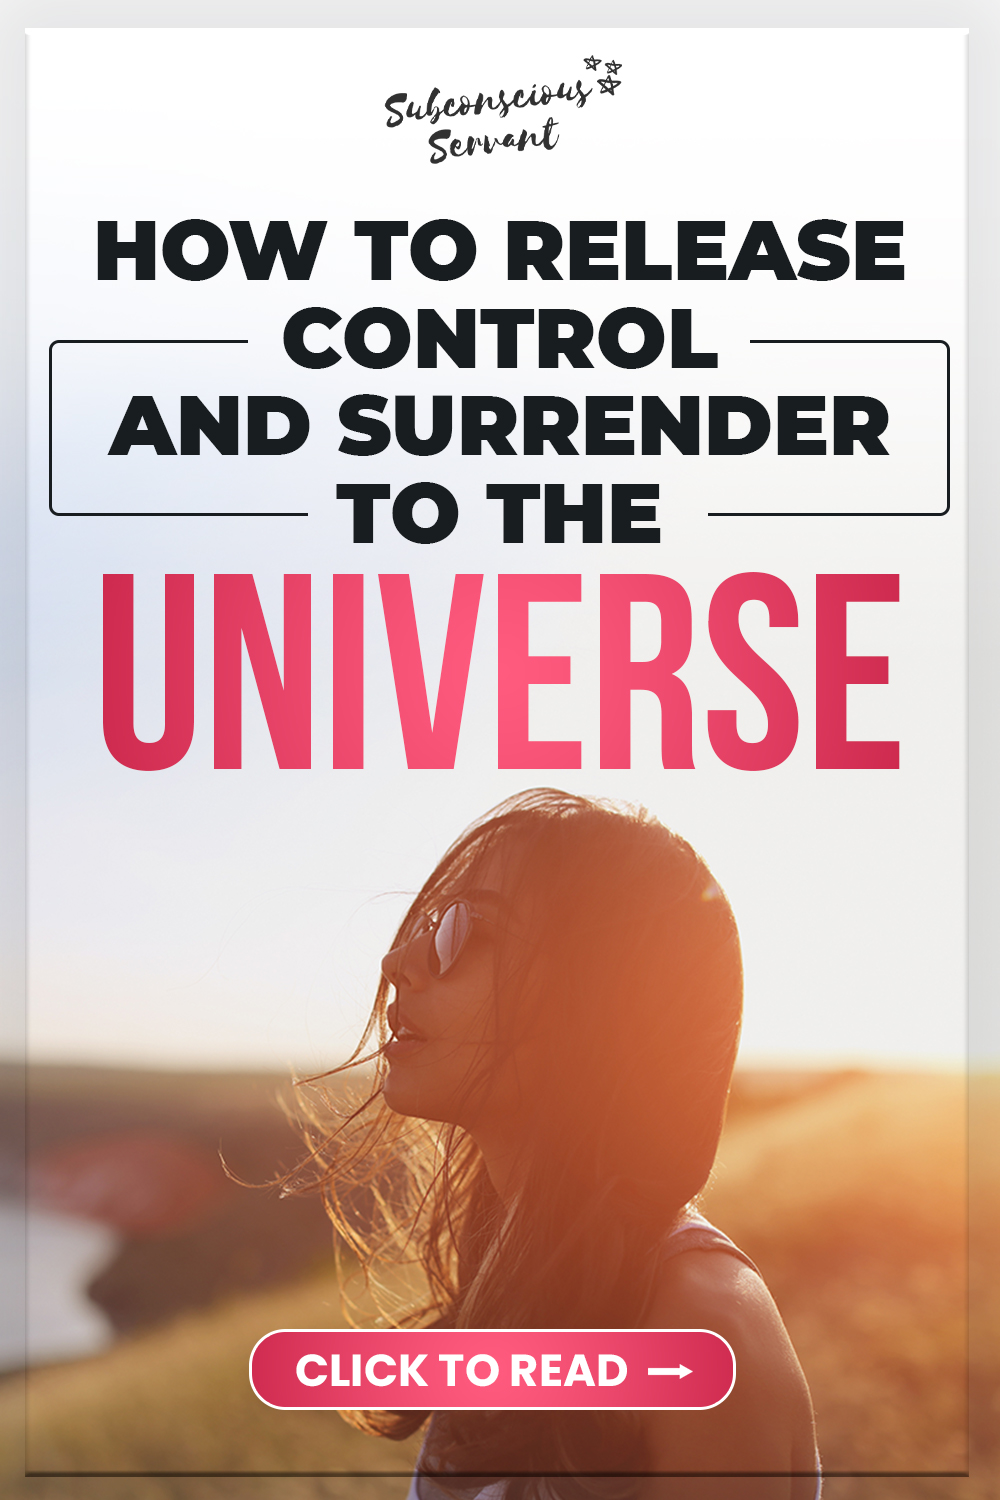 How To Surrender To The Universe: 10 Tips To Release Control